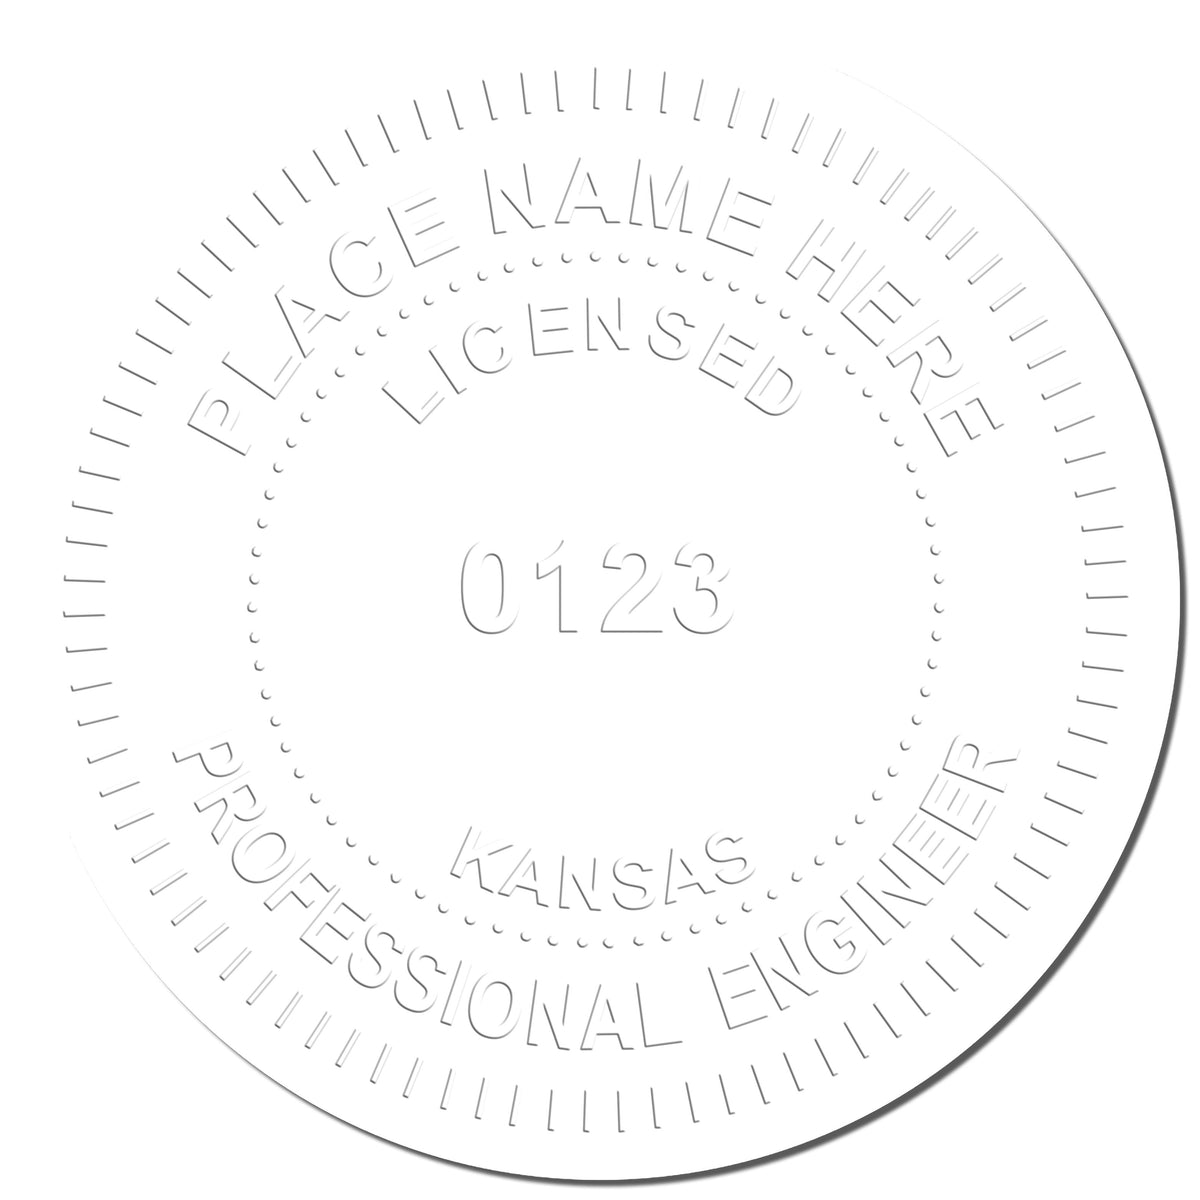 This paper is stamped with a sample imprint of the State of Kansas Extended Long Reach Engineer Seal, signifying its quality and reliability.